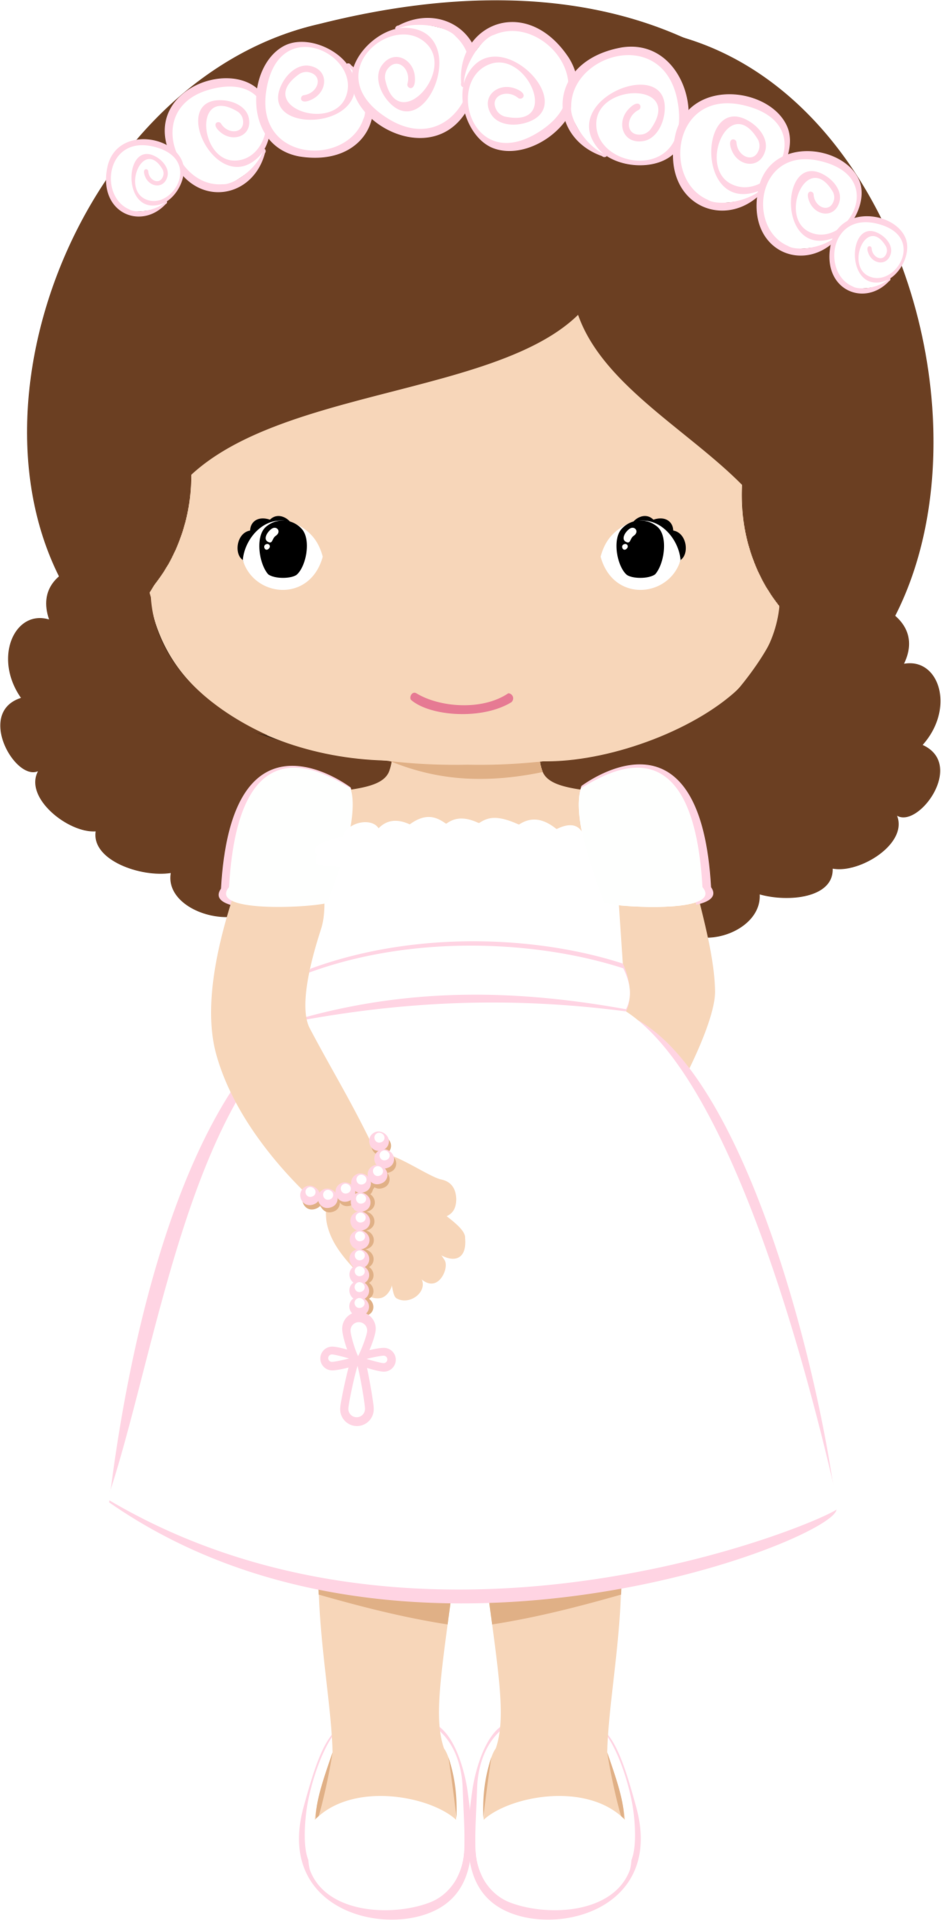 Communion clipart printable first, Communion printable first